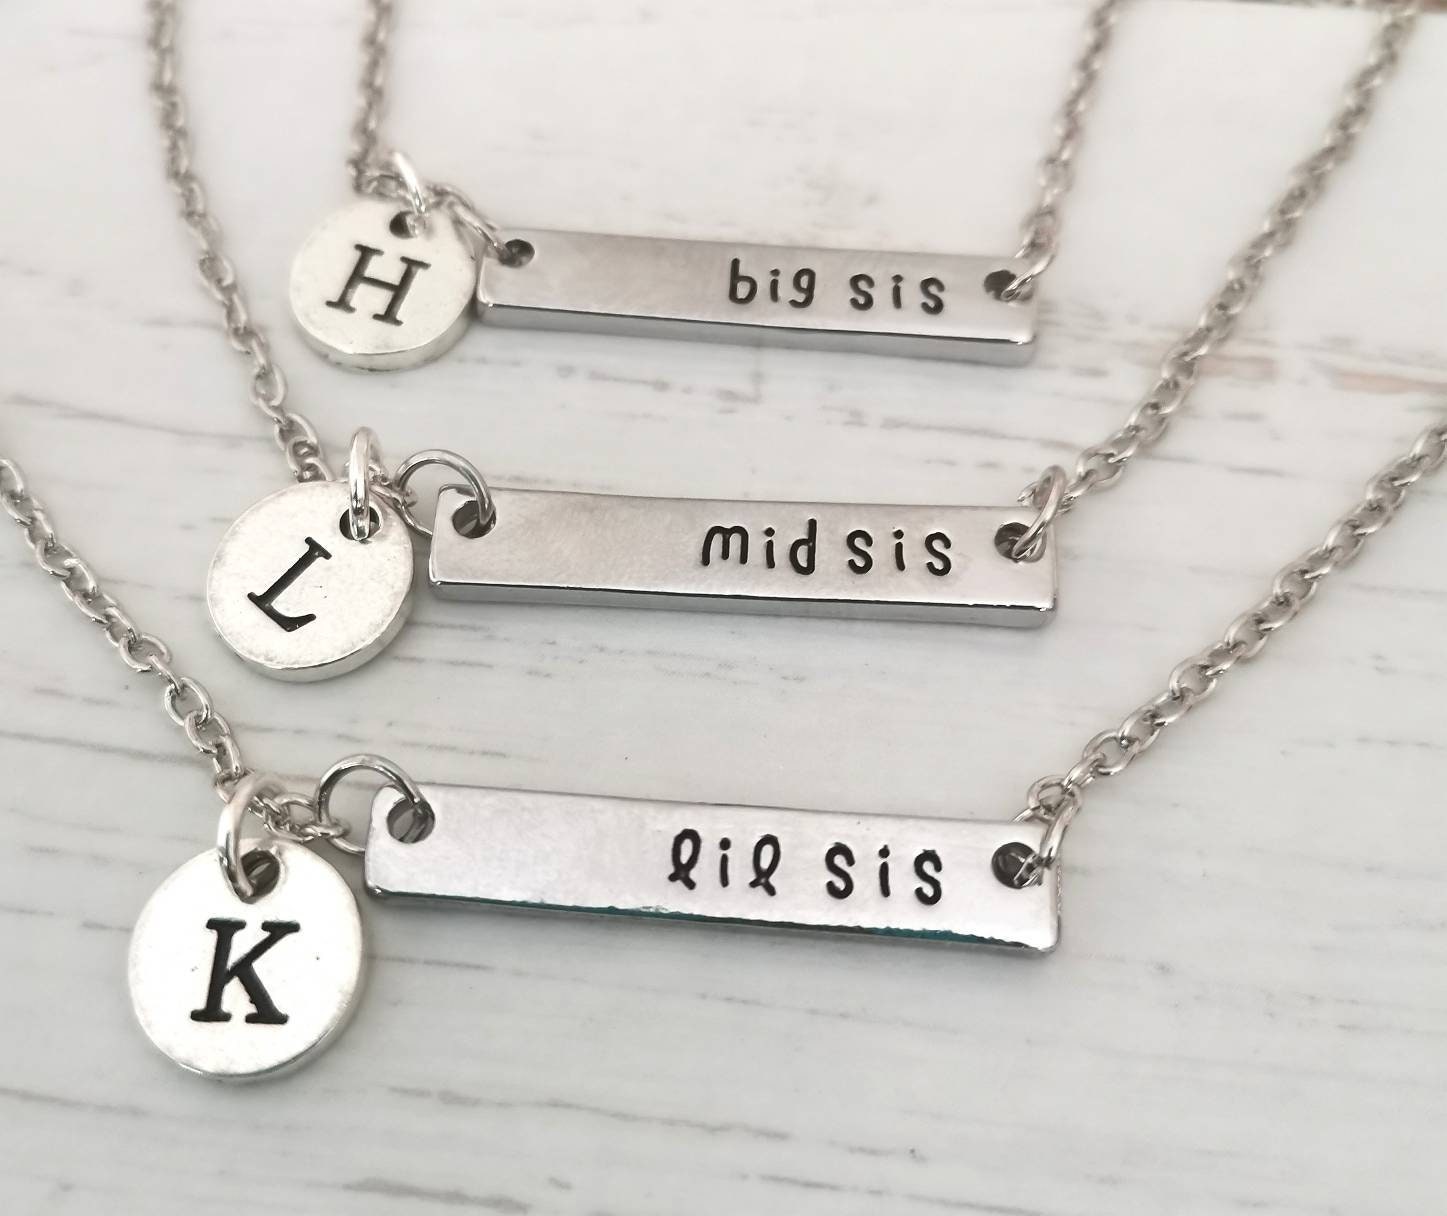 Big Sister, Little Sister, Middle Sister, Personalized gift for Sisters, Big Sis gift, Mid Sis, Lil Sis gift, Sister Necklaces, 3 sisters